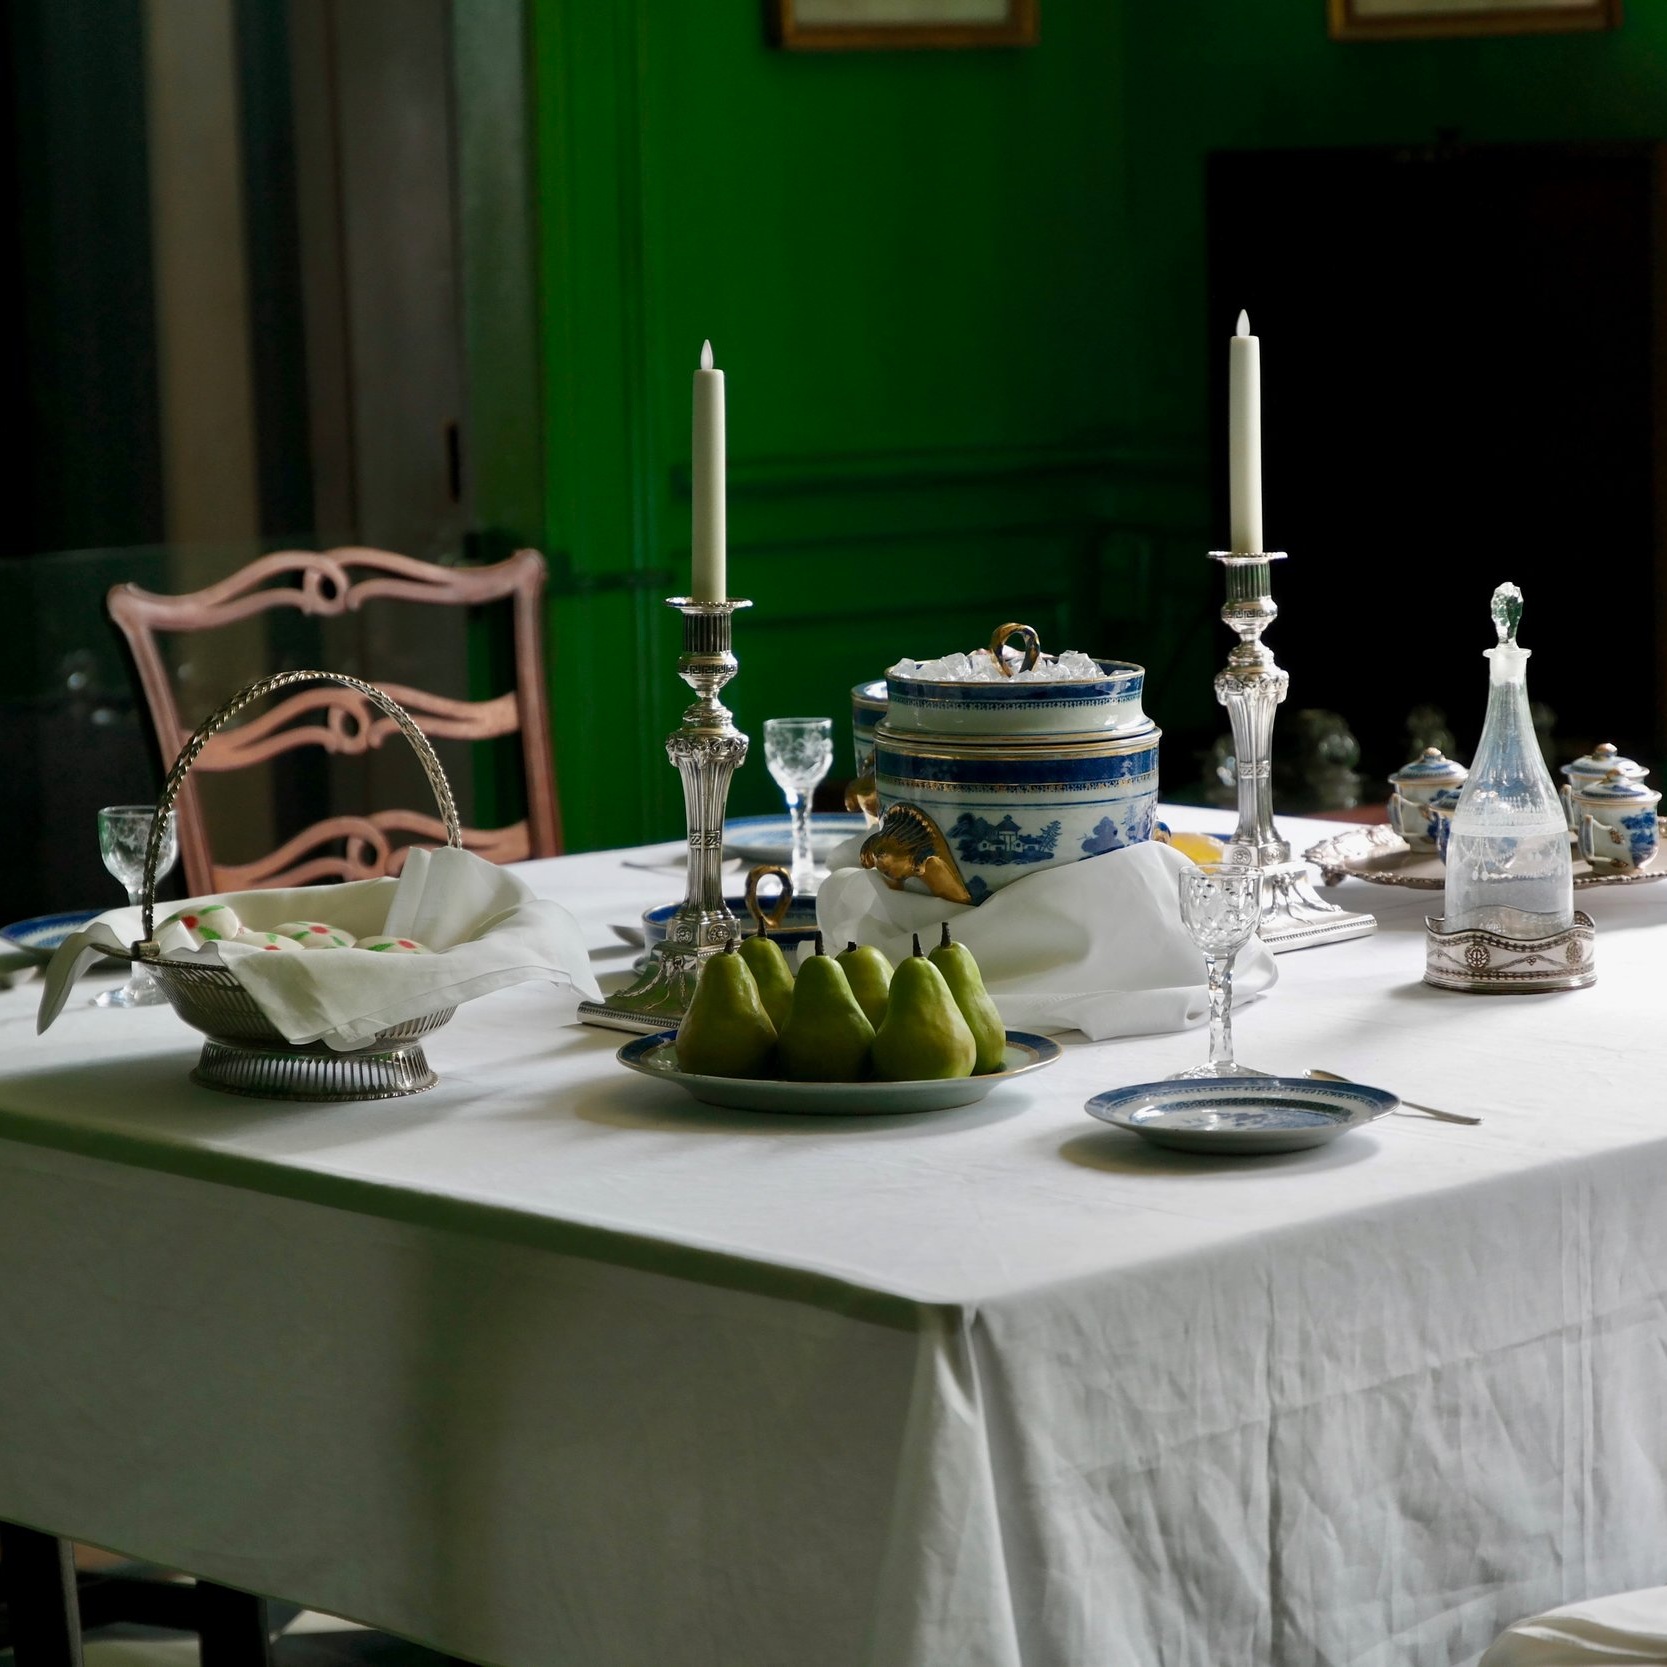 A recreated historic table is set for dinner.